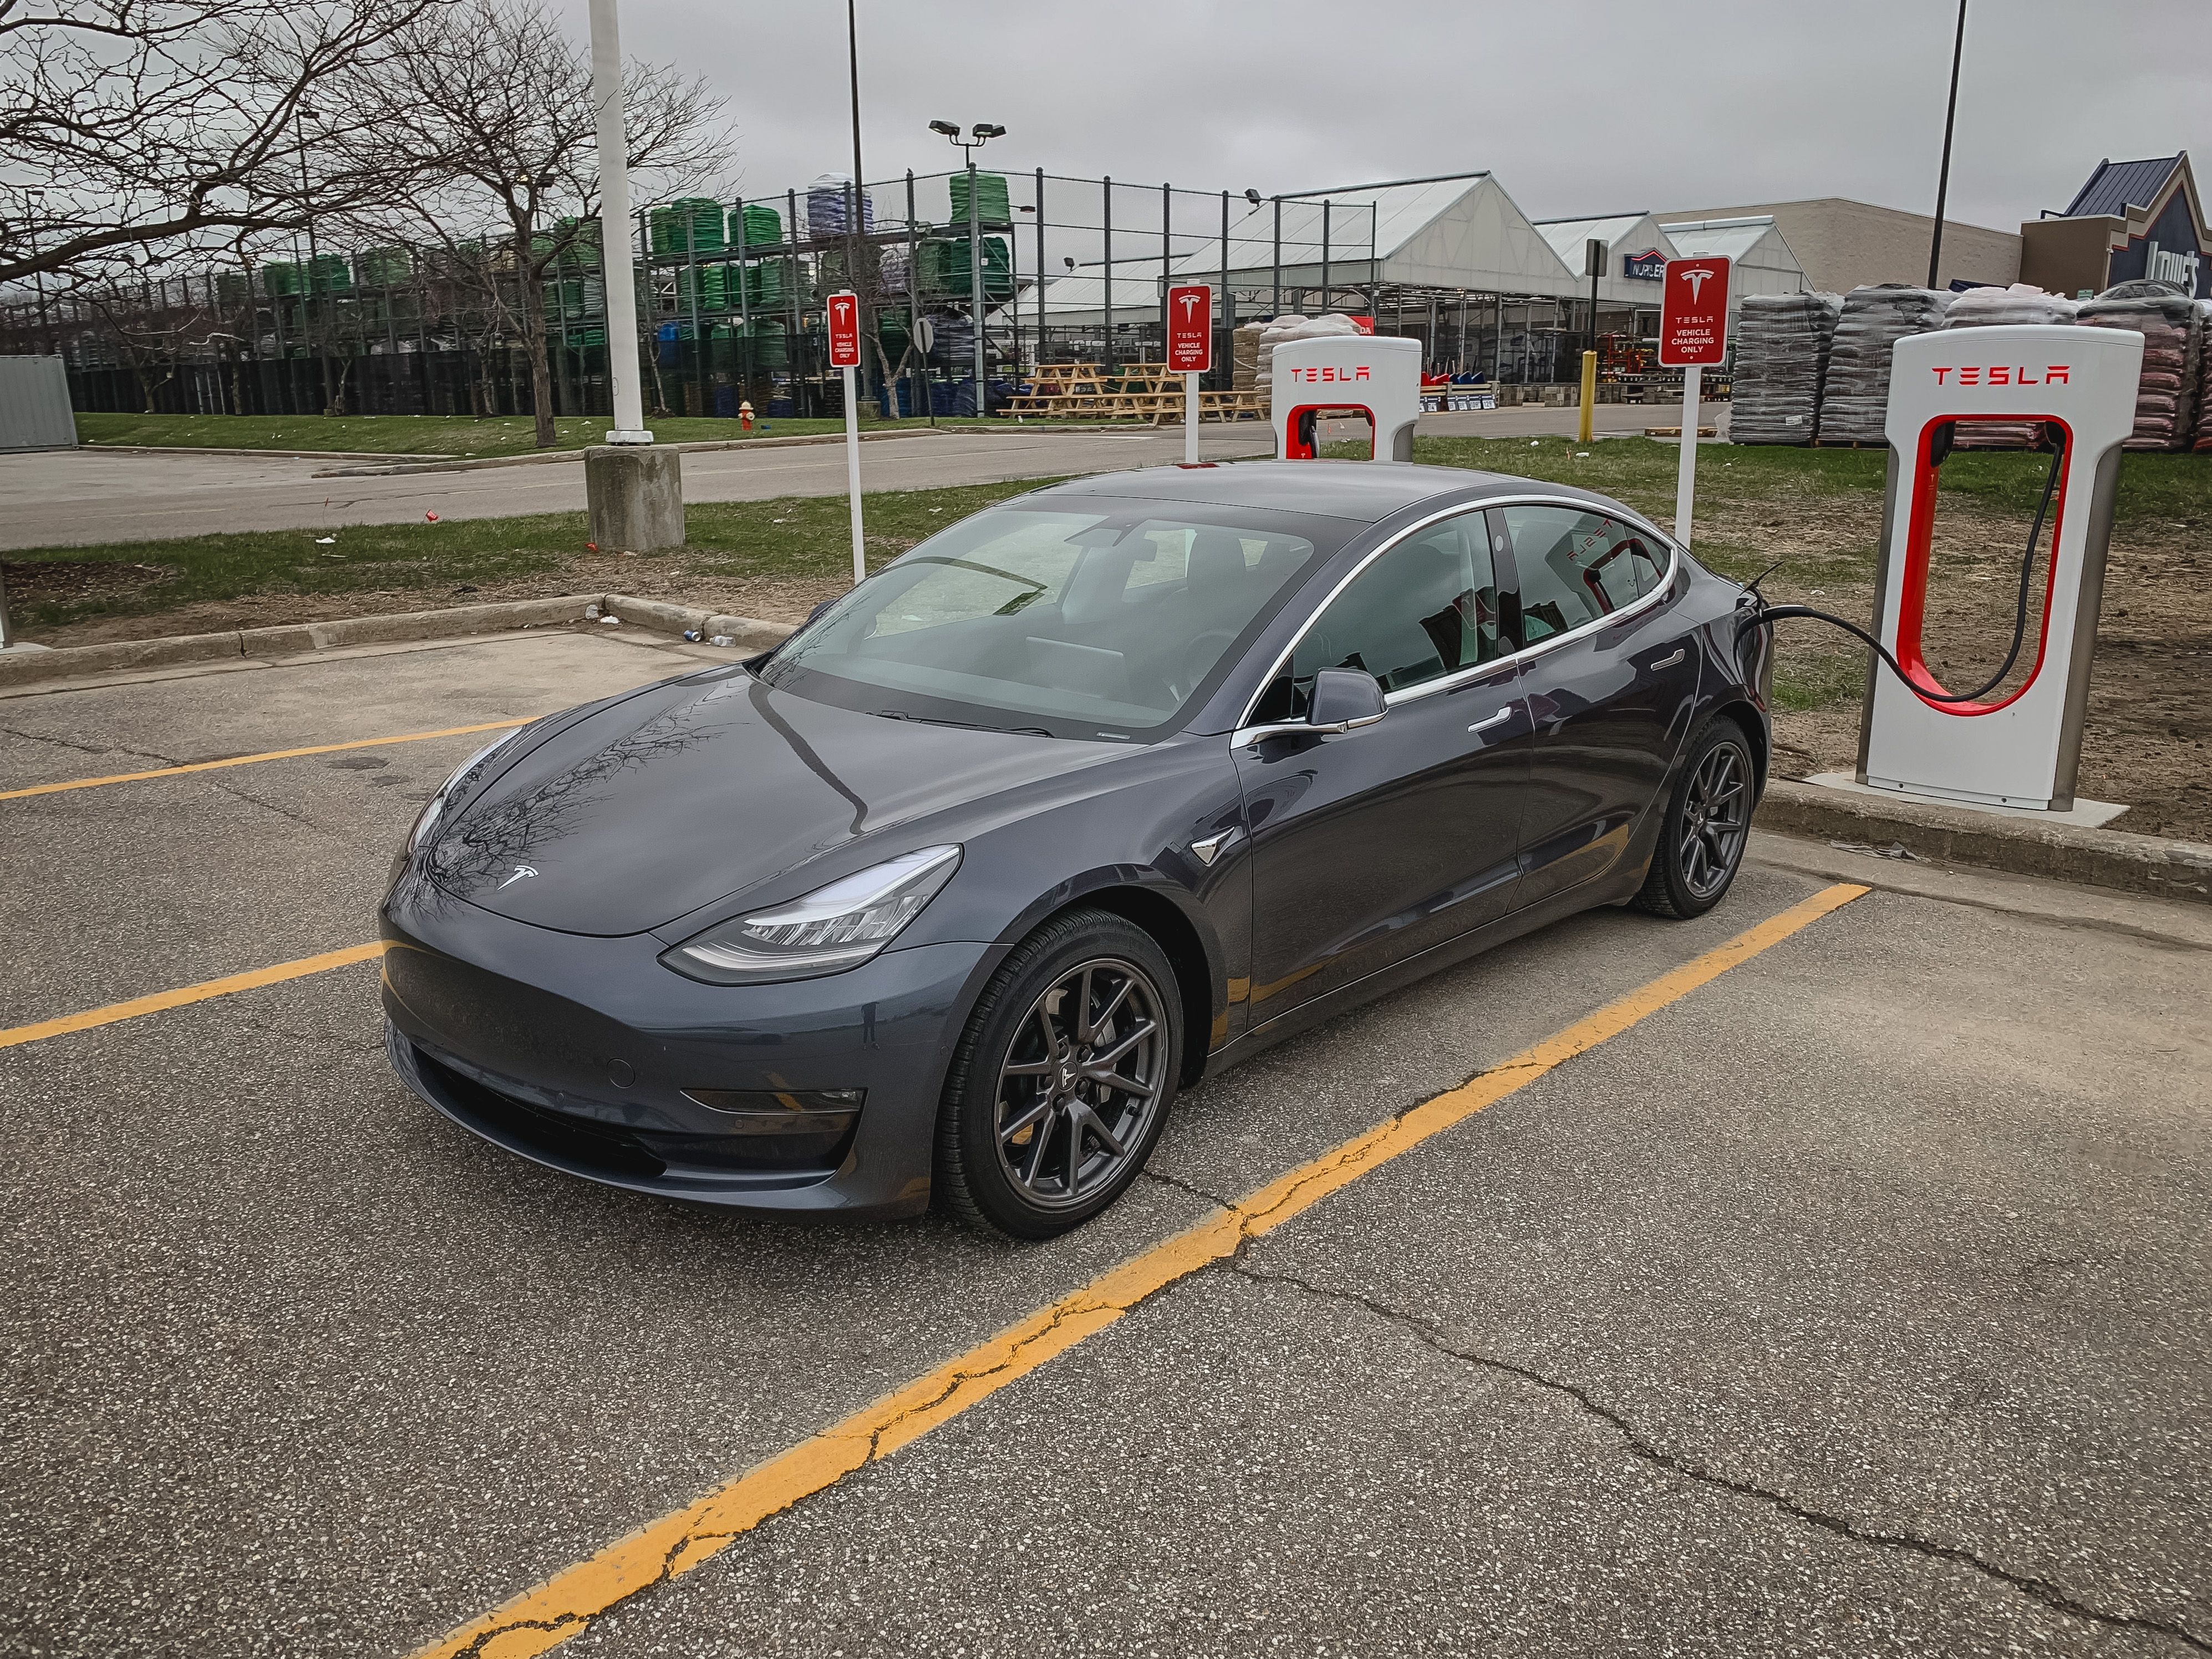 Choosing Between 150kW and 250kW Charging Stalls: Factors to Consider for Electric Vehicle Drivers